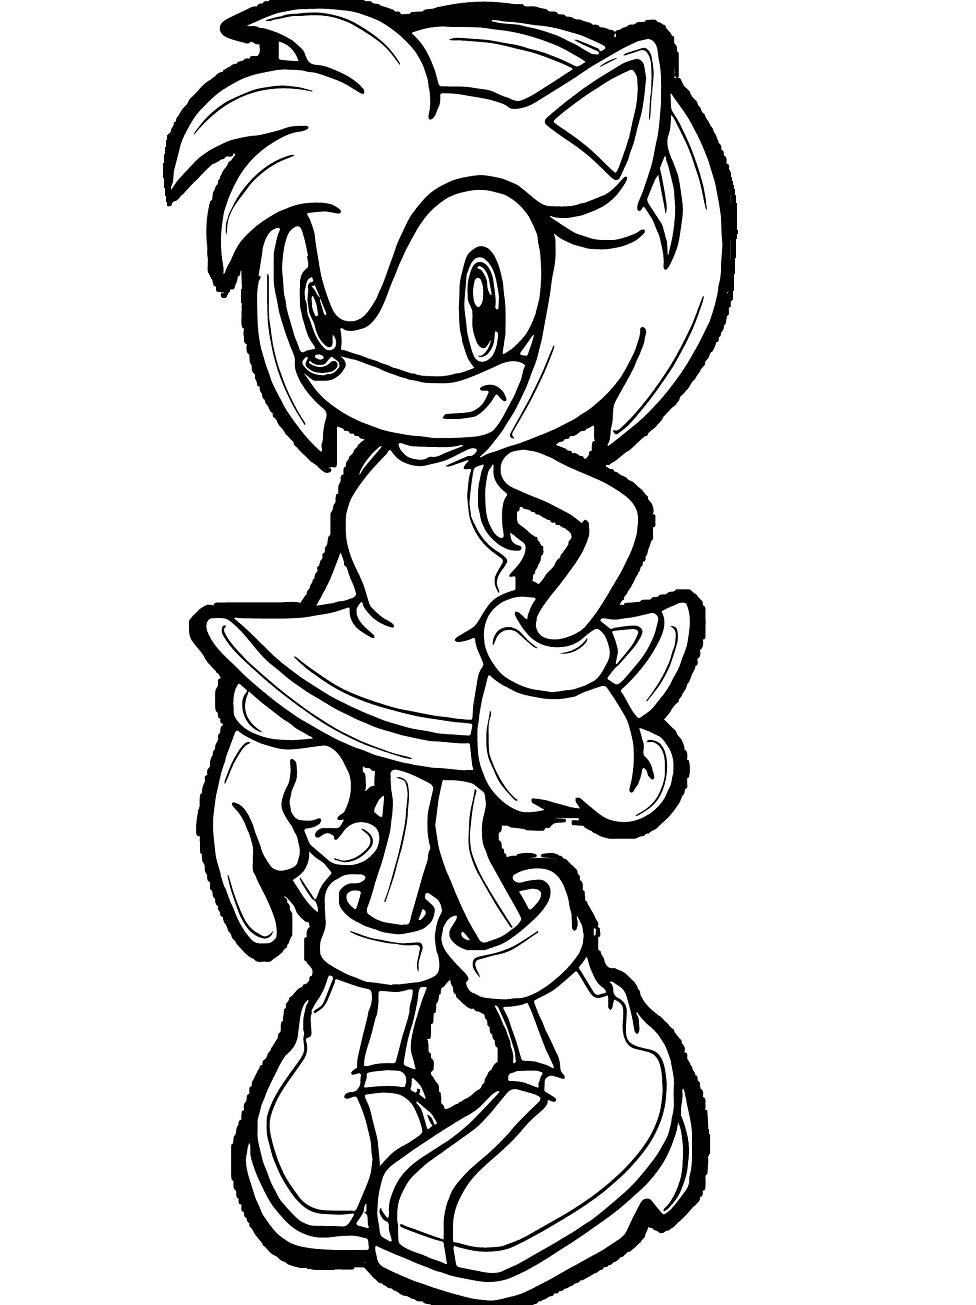 Amy Rose in Sonic Coloring Pages